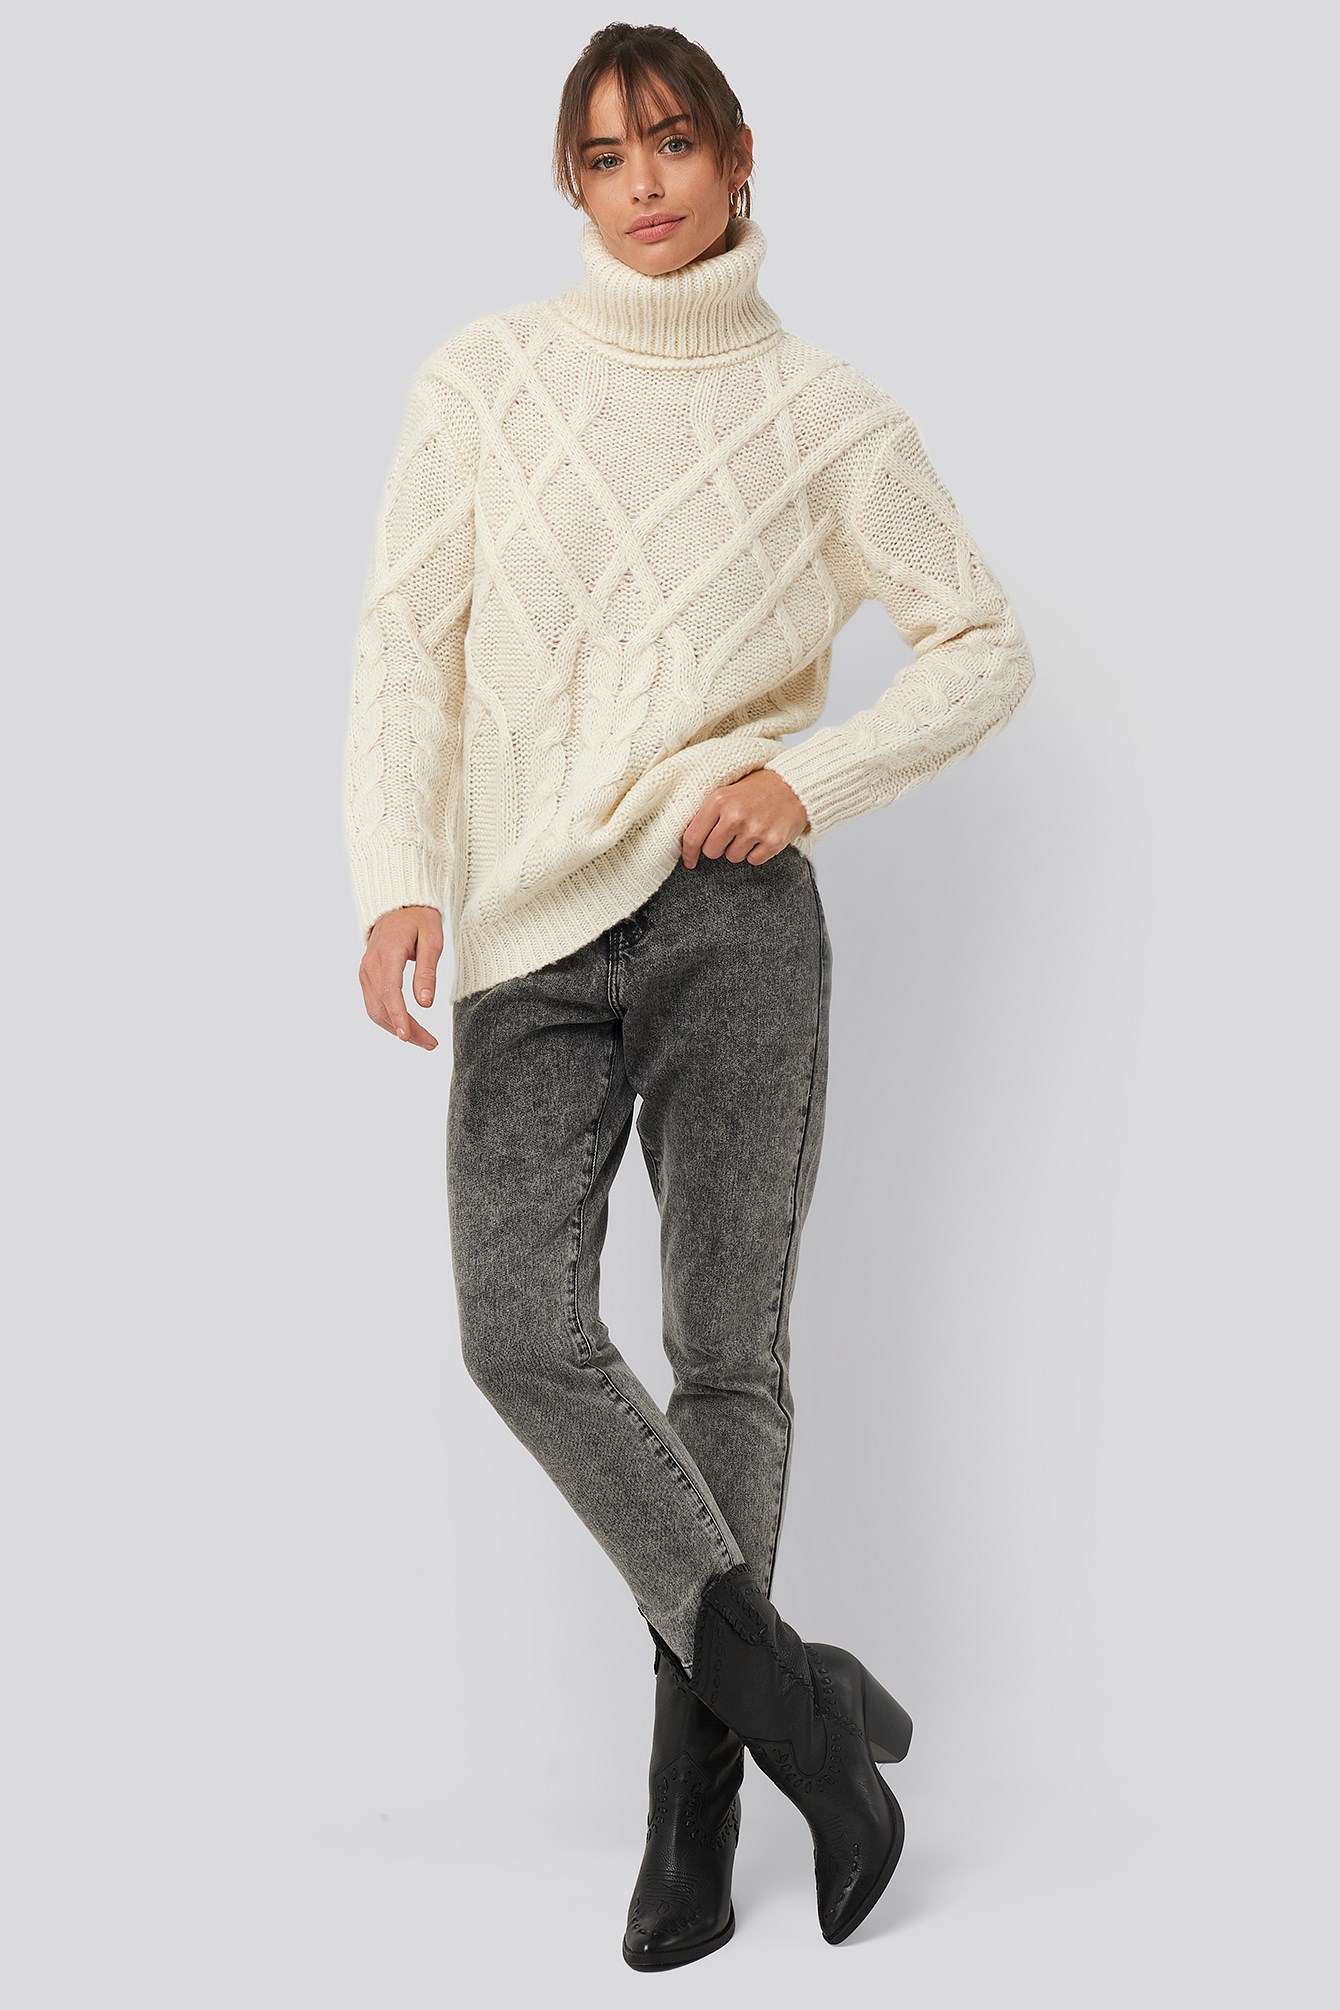 Cable Knitted High Neck Sweater Outfit.